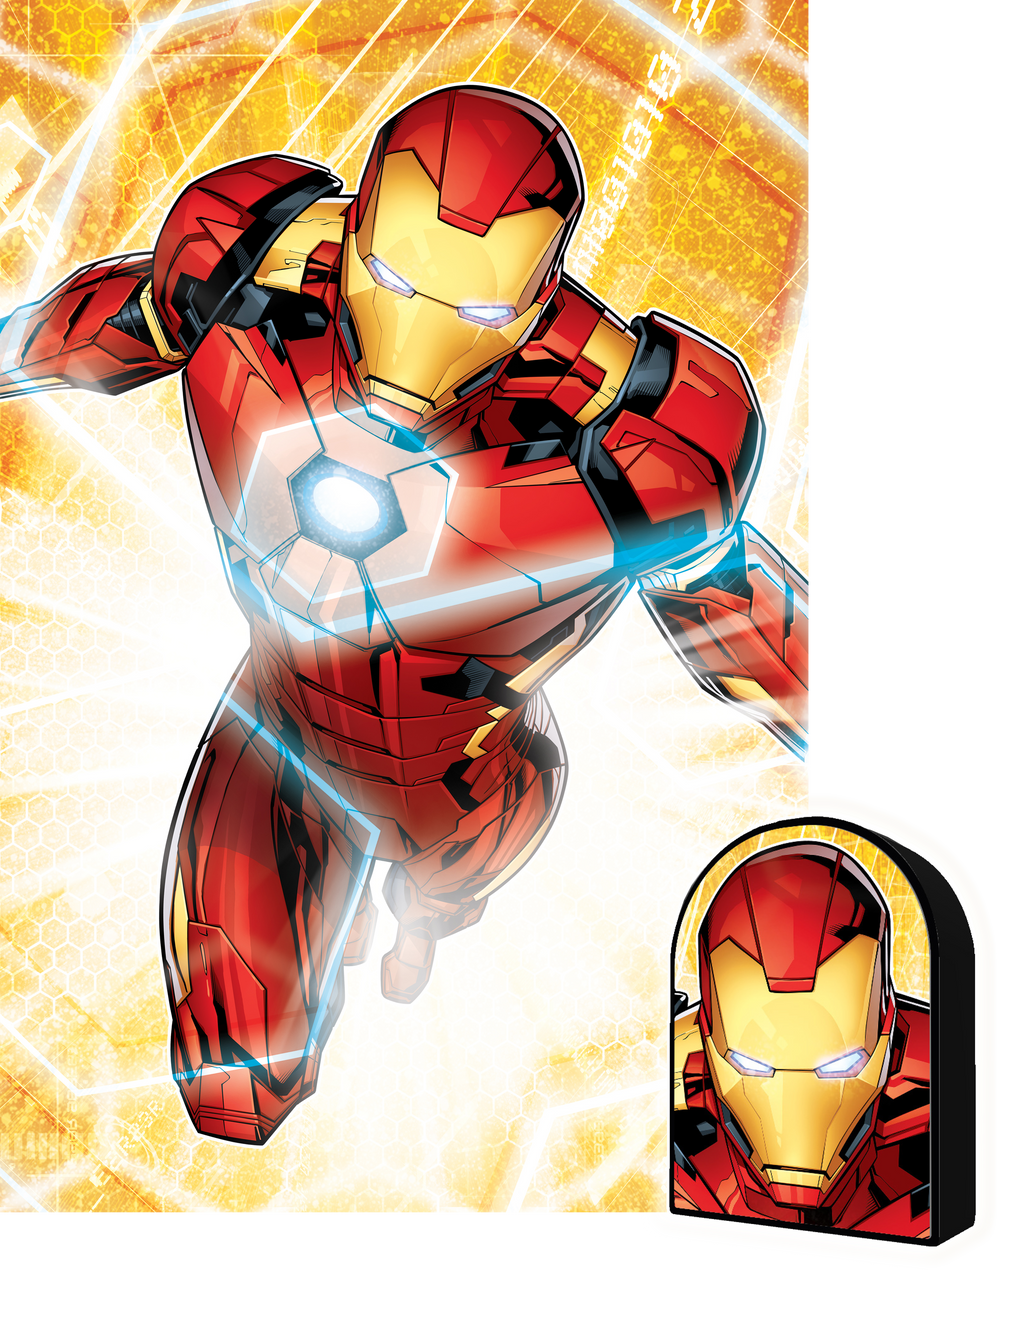 Ironman Marvel 3D Jigsaw Puzzle in Tin Box Packaging 35585 300pc 12x18